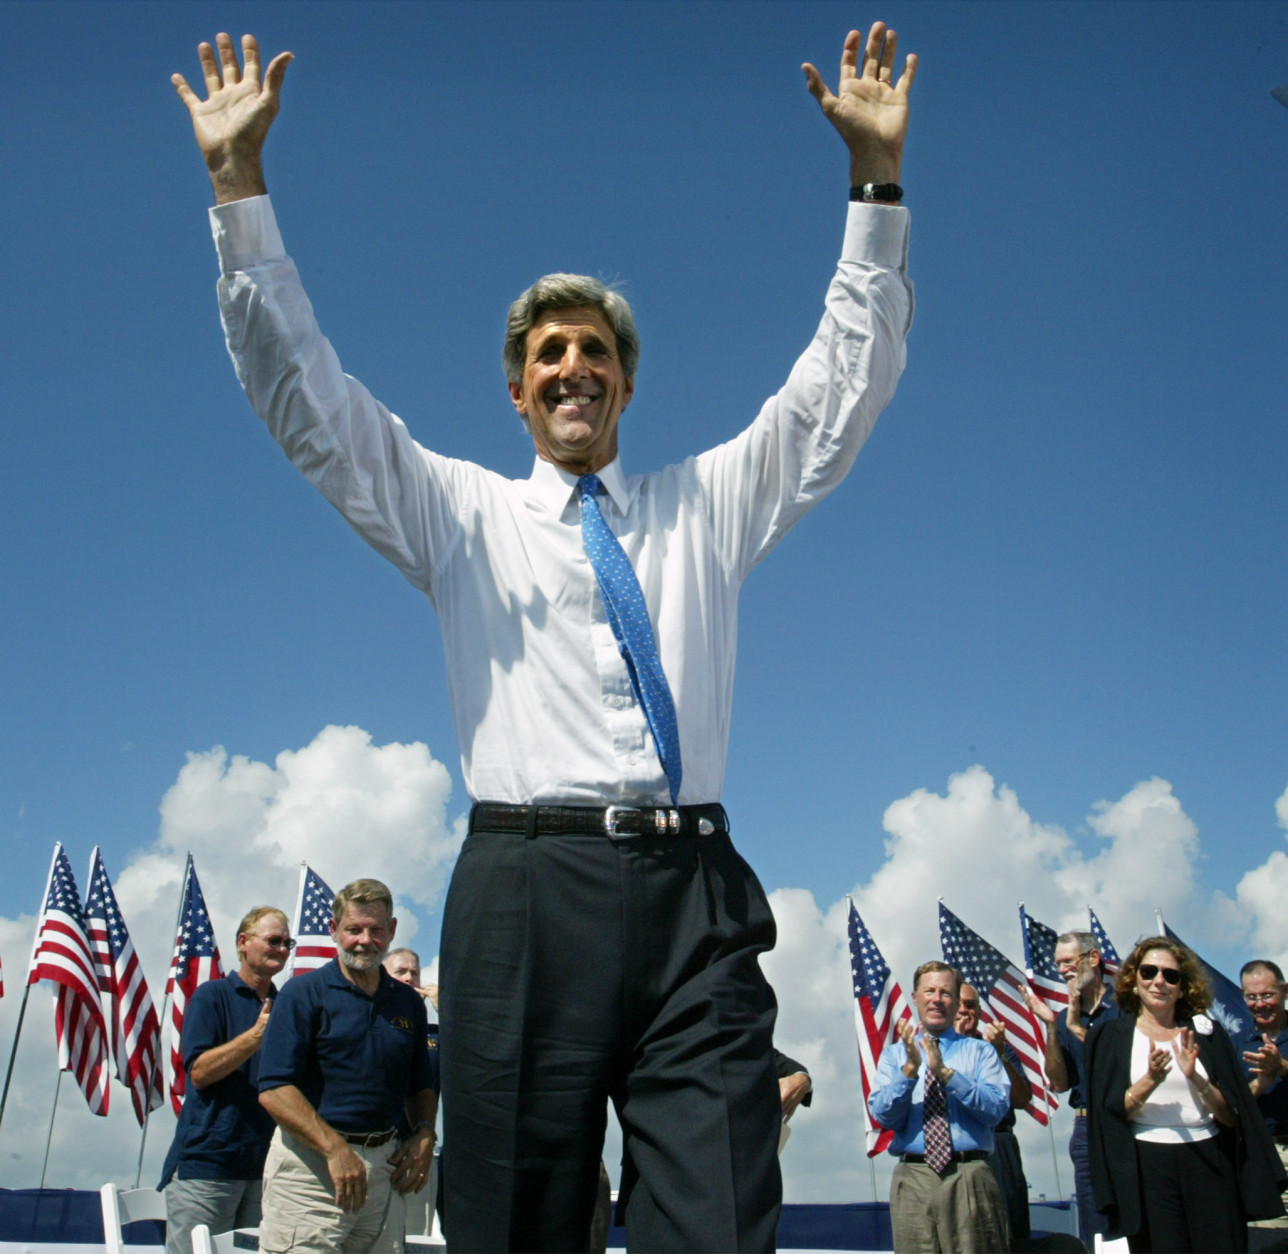 On this date in 2004, Sen. John Kerry accepted the Democratic presidential nomination at the party's convention in Boston with a military salute and the declaration: "I'm John Kerry and I'm reporting for duty." (AP Photo/Lawrence Jackson)